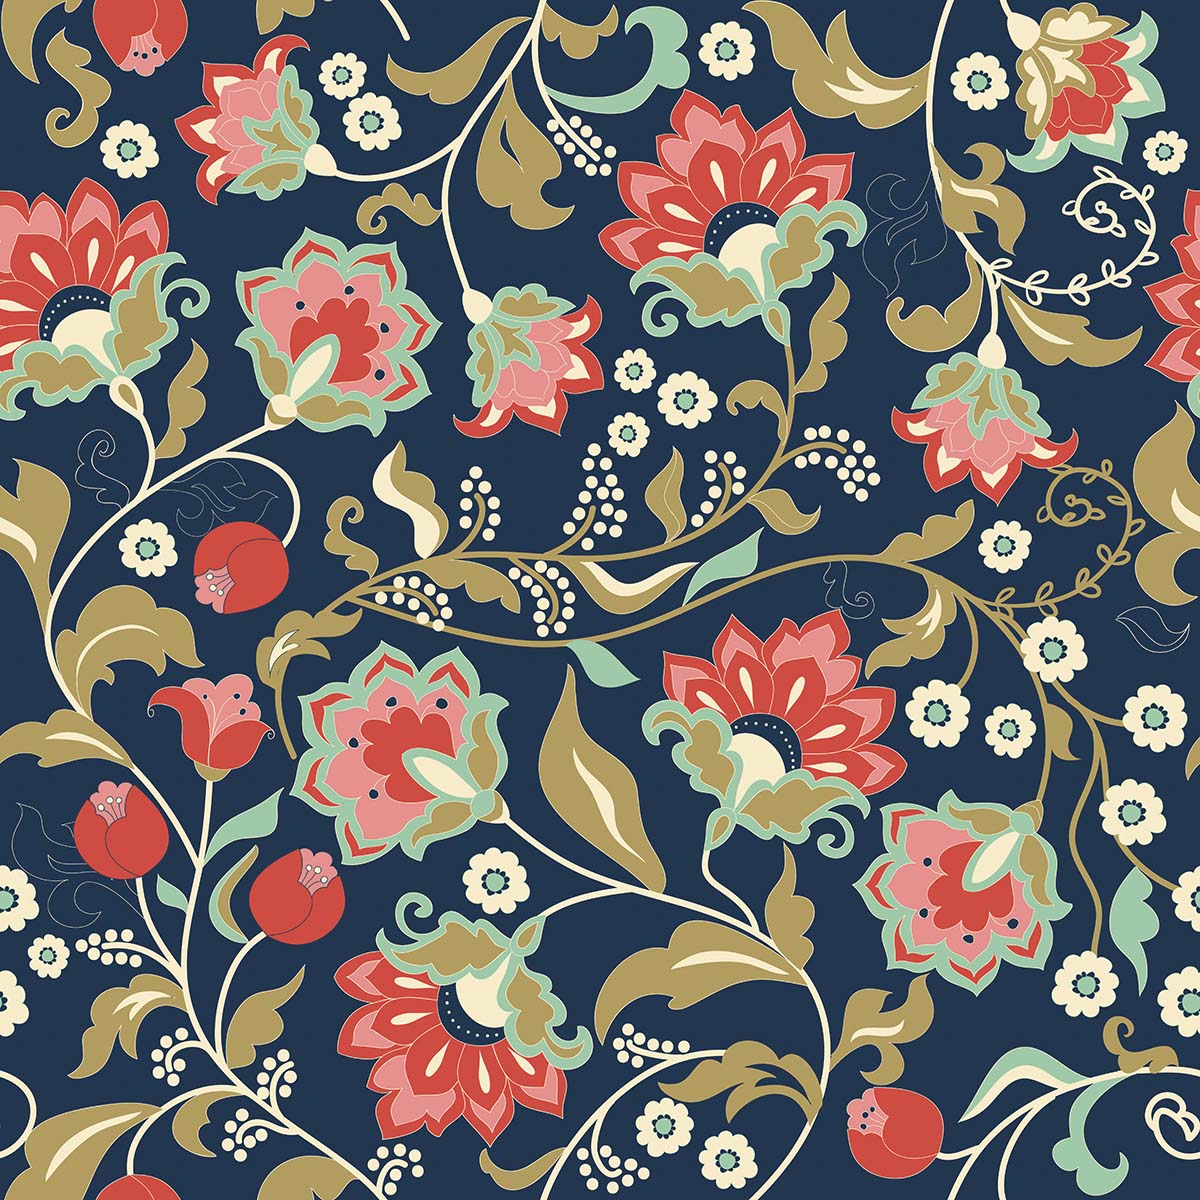 A colorful floral pattern on a blue background